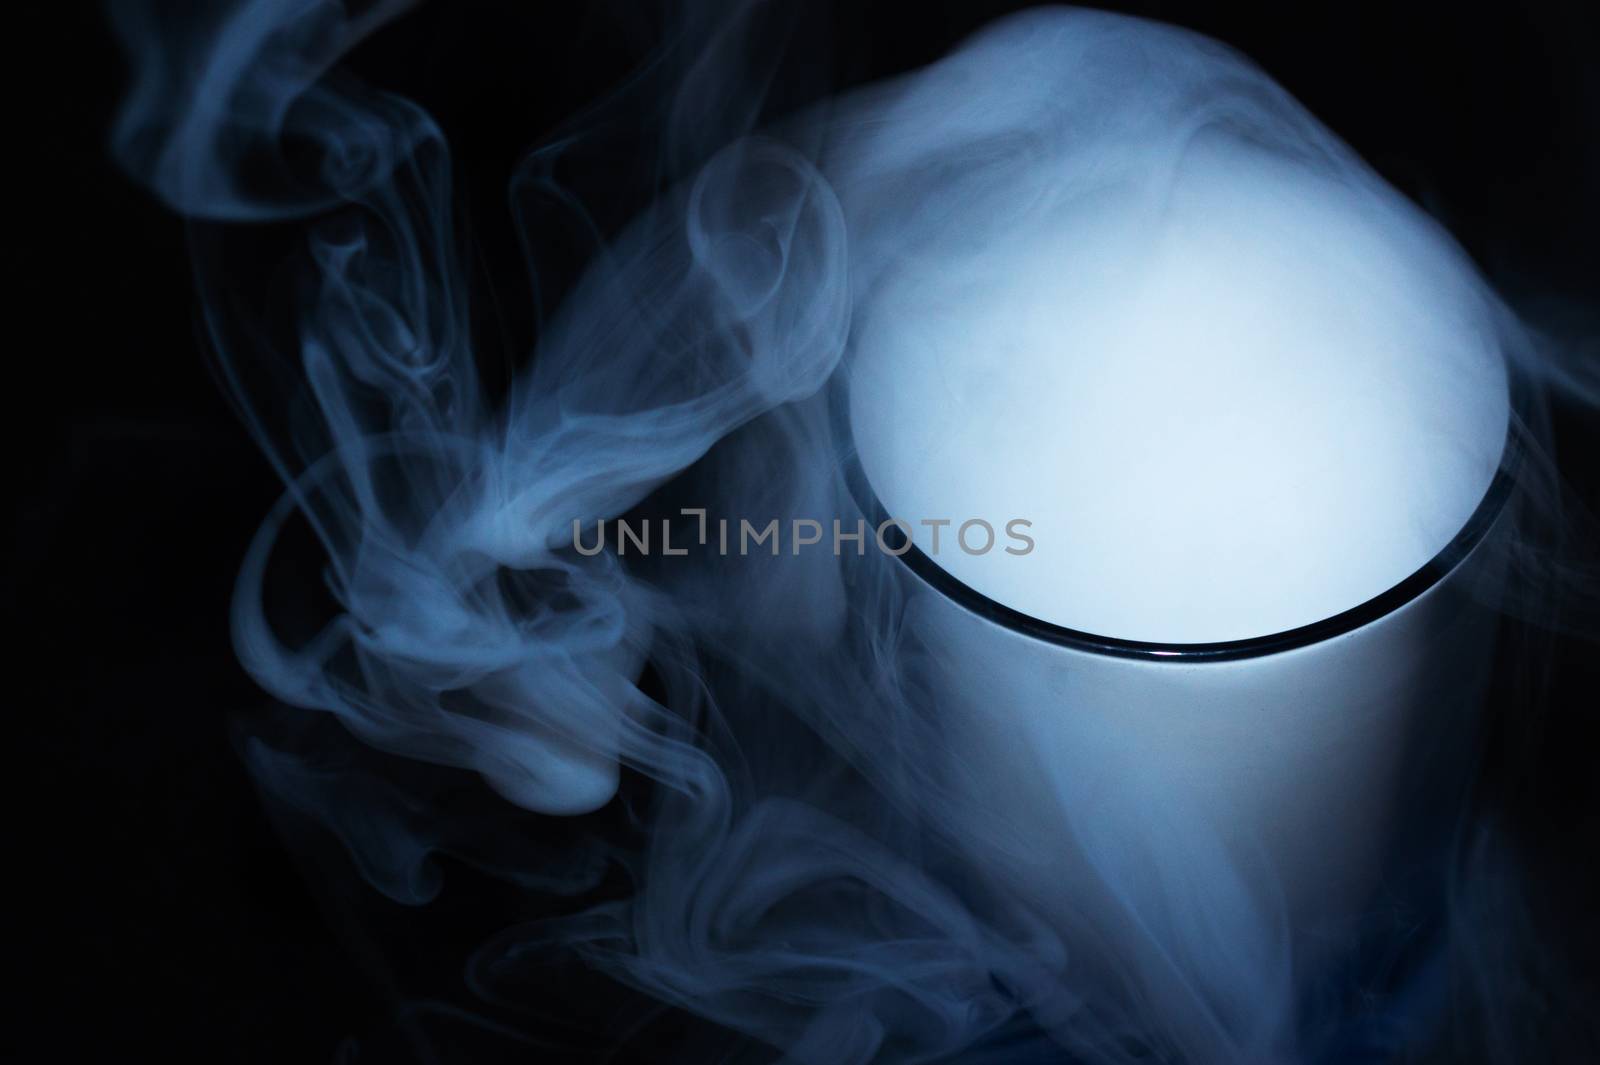 White smoke on black fabric background in glass. Smoke spreads over the background. Vaping culture, life without cigarettes. Conceptual image.